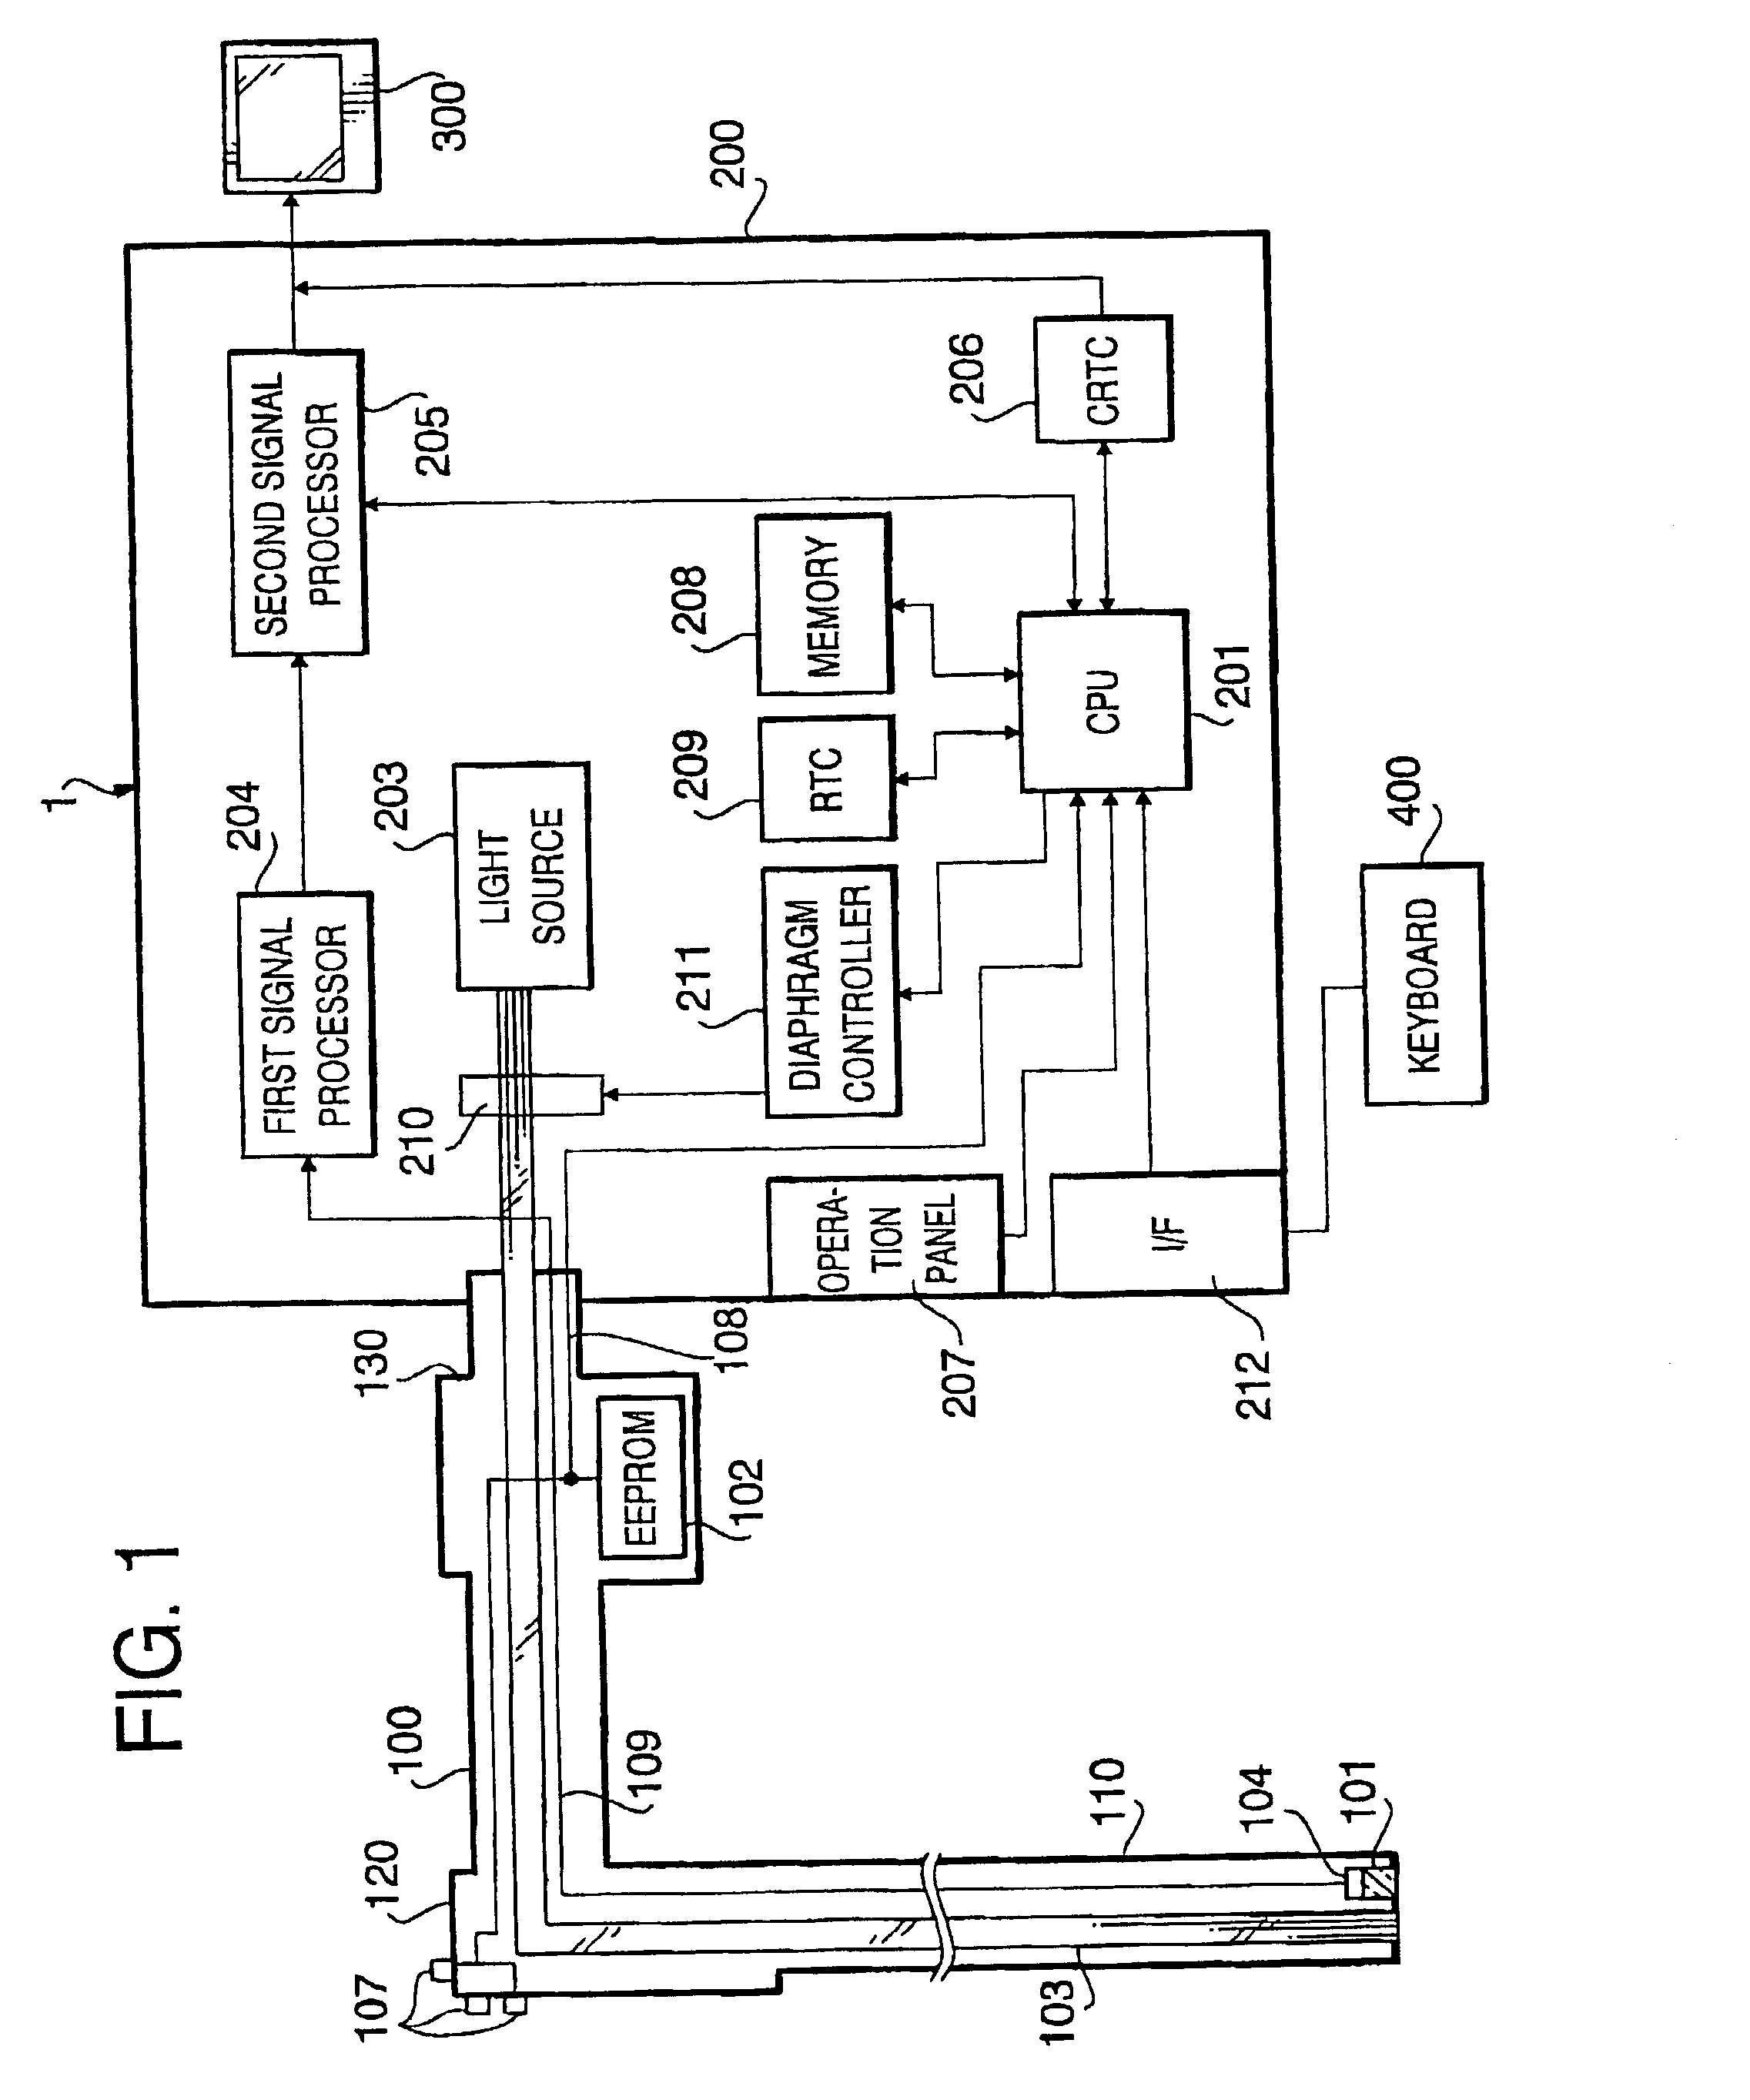 Method and apparatus for selective registration of endoscopes with database